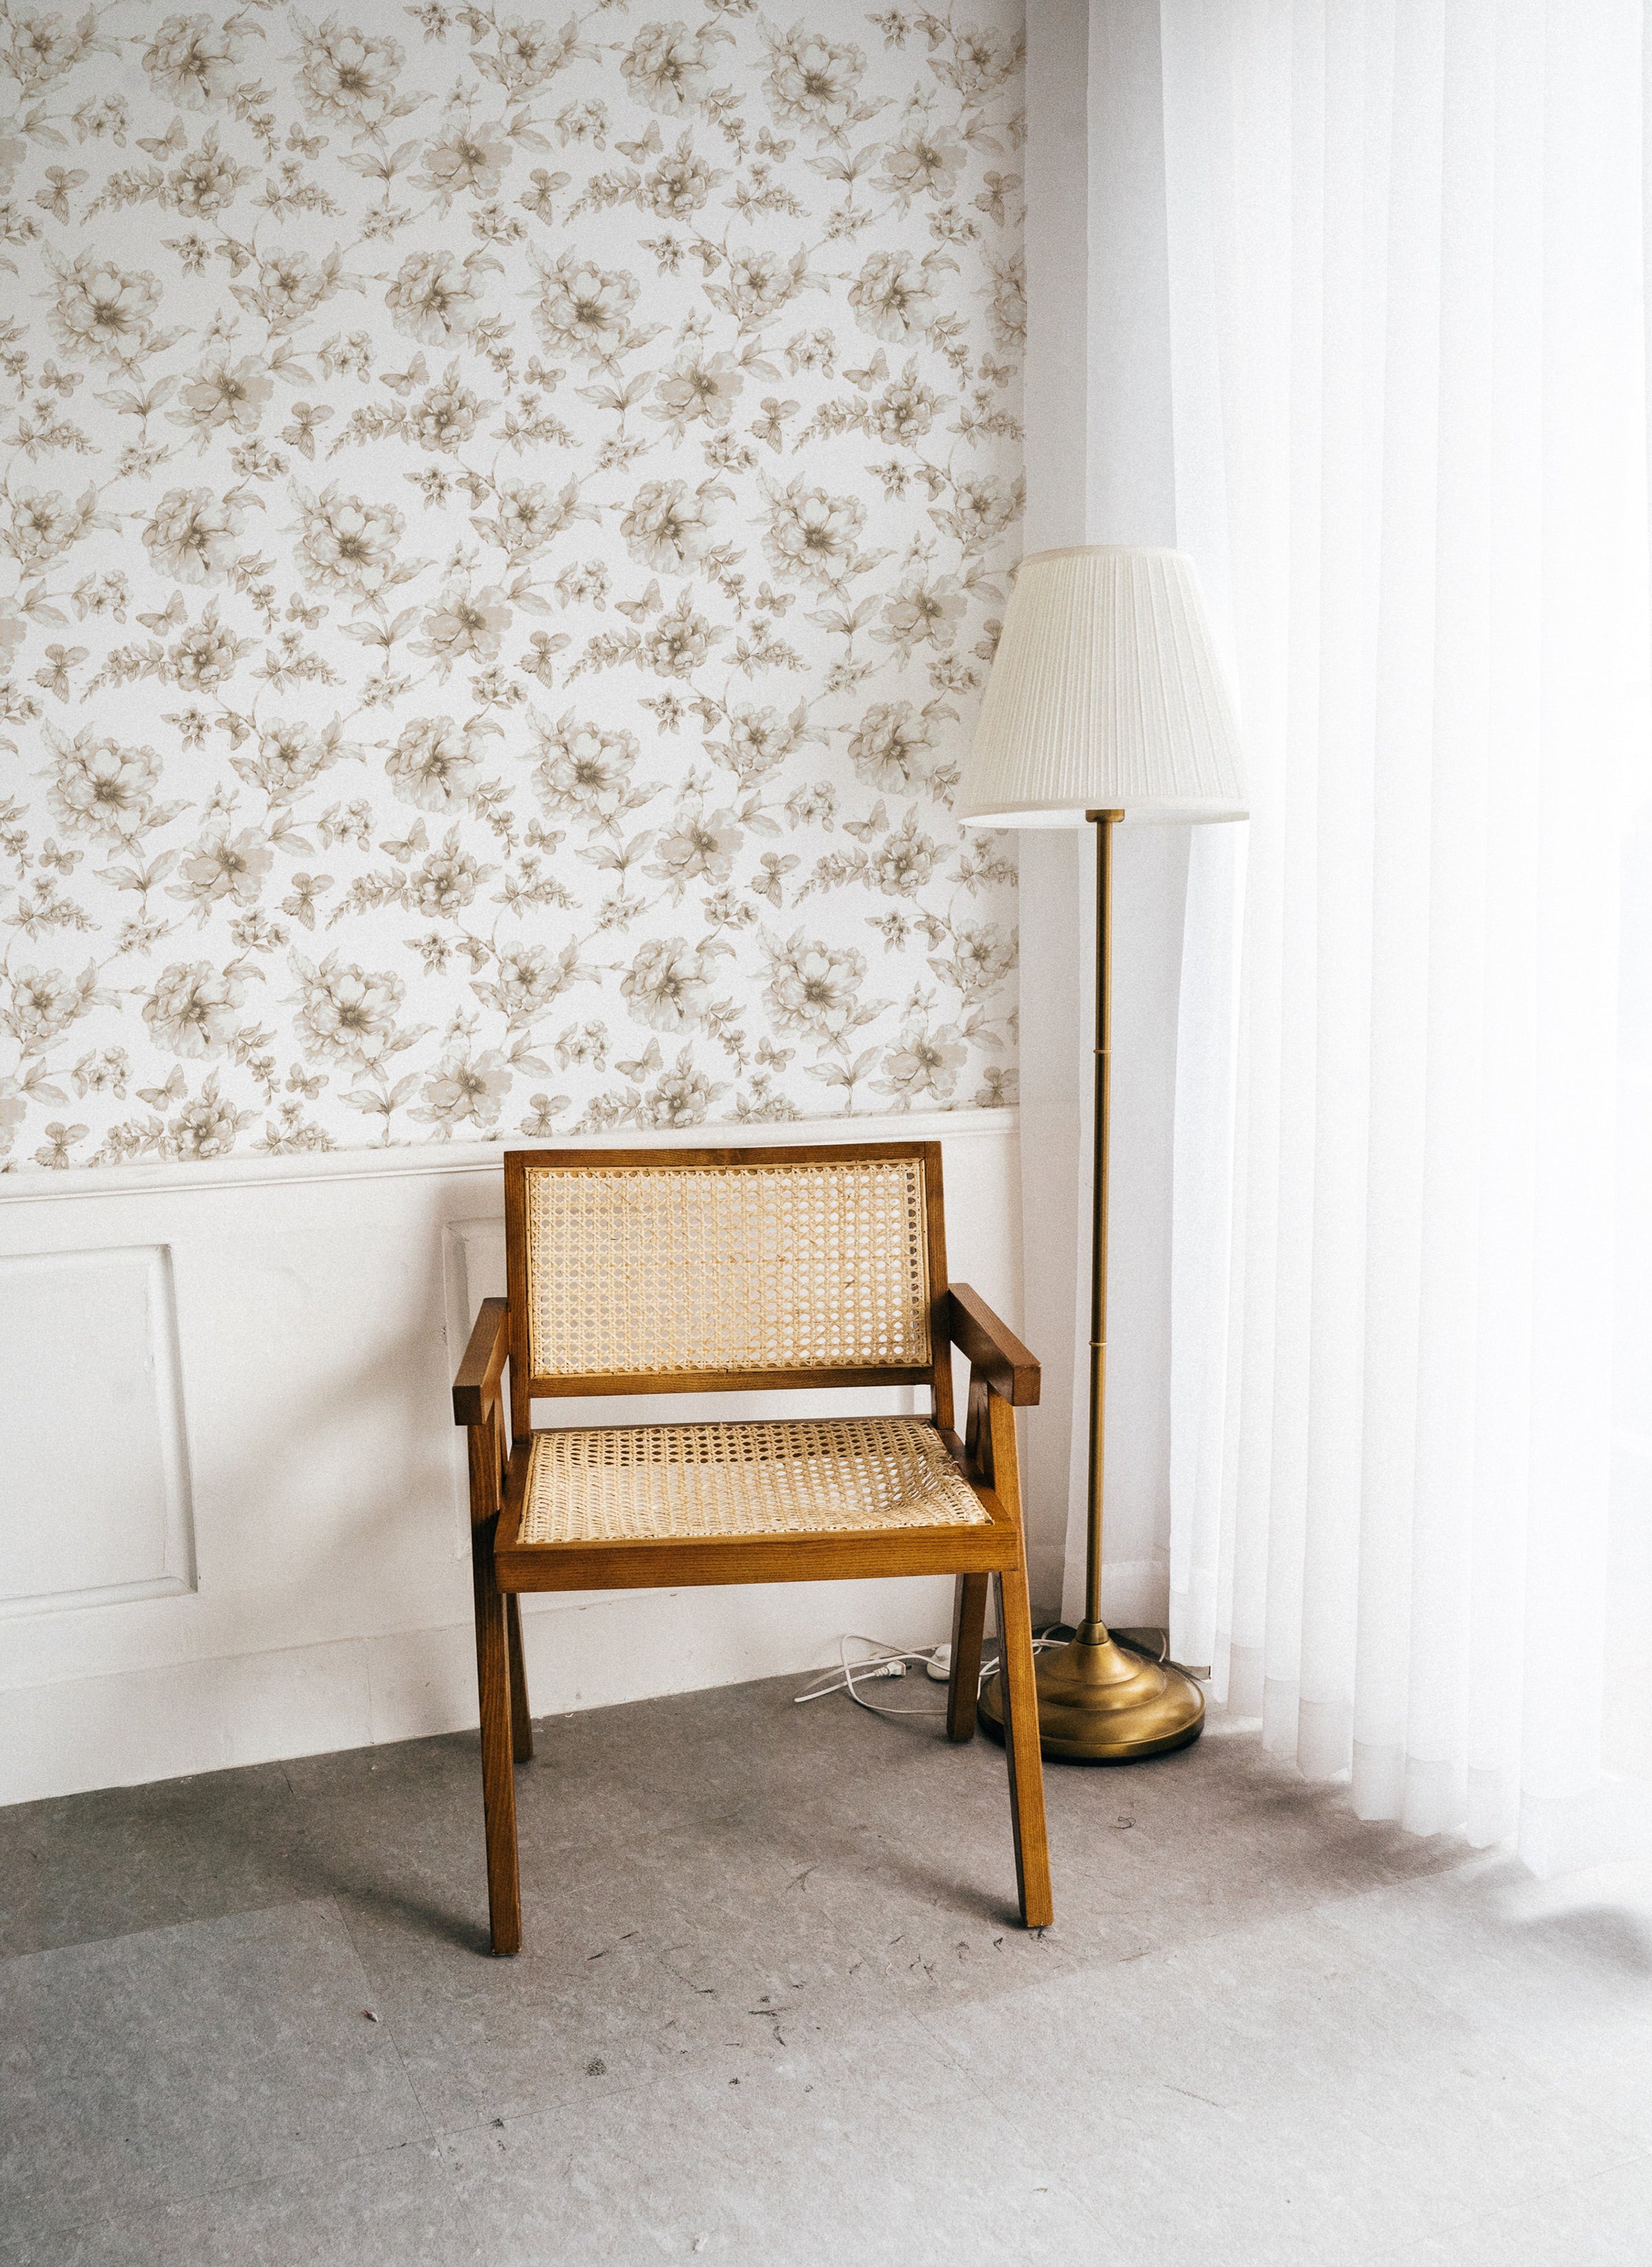 A minimalist setup featuring the Sepia Trellis Wallpaper in a bright room with natural light. The wallpaper provides a delicate backdrop to a vintage wooden chair and a tall floor lamp, enhancing the serene and elegant atmosphere.